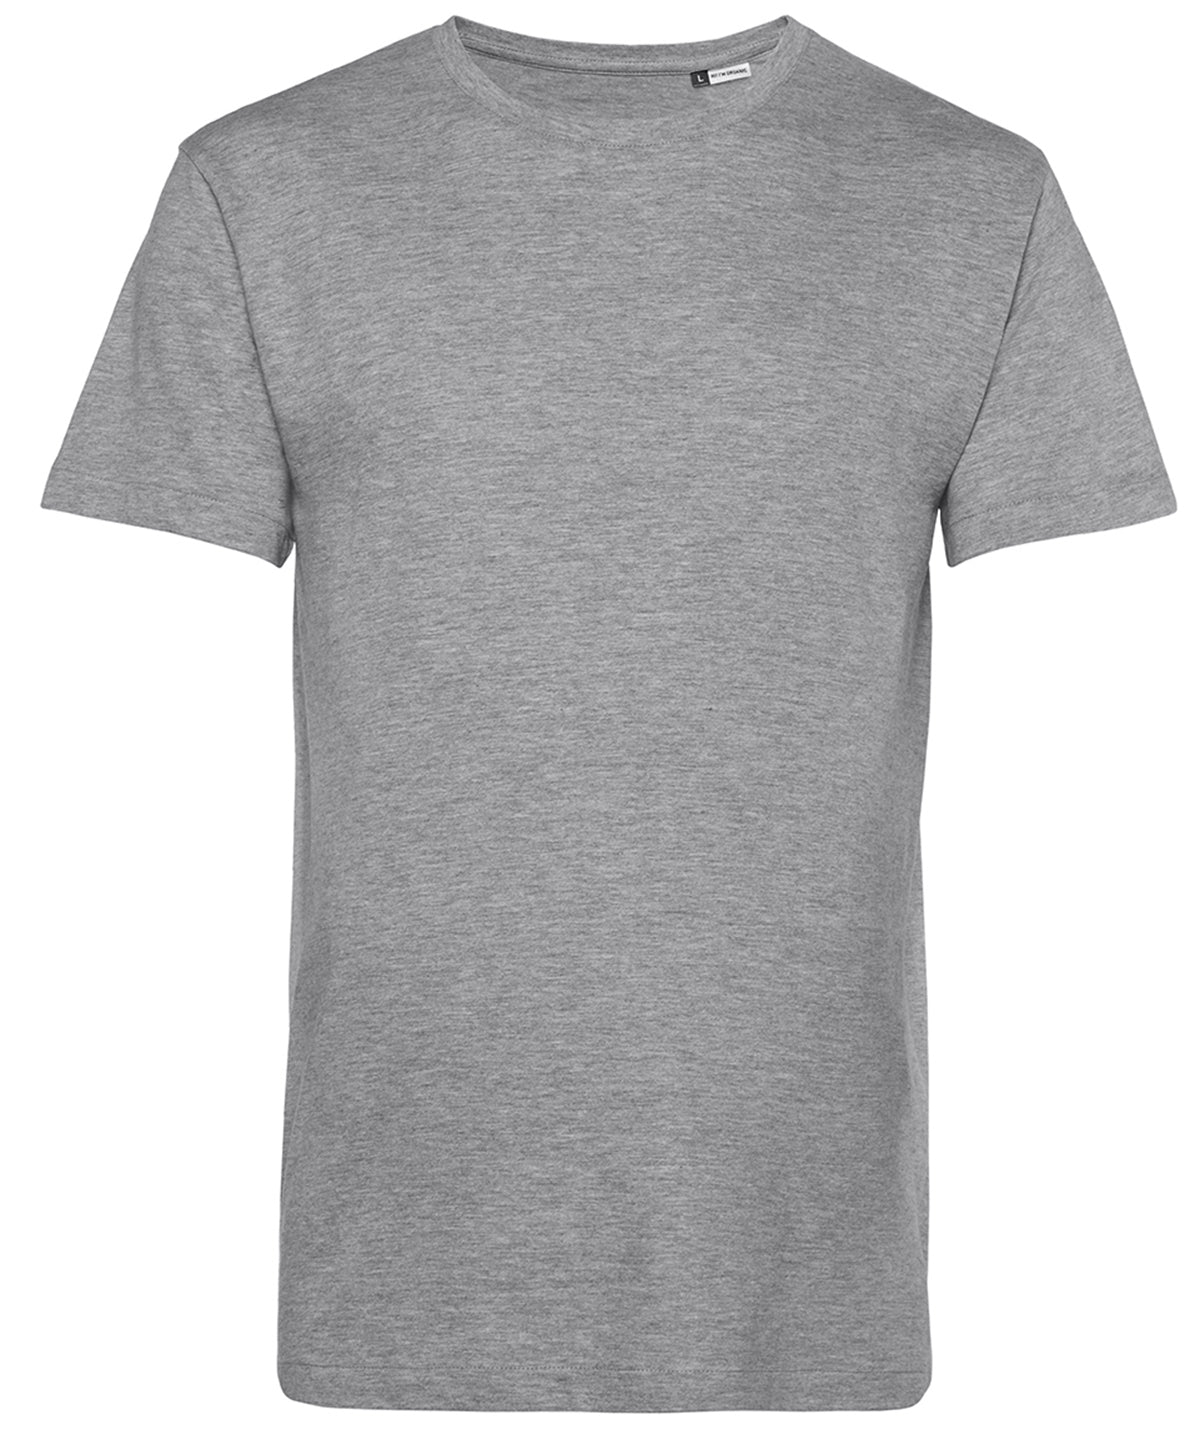 B&C Collection Inspire E150 Heather Grey